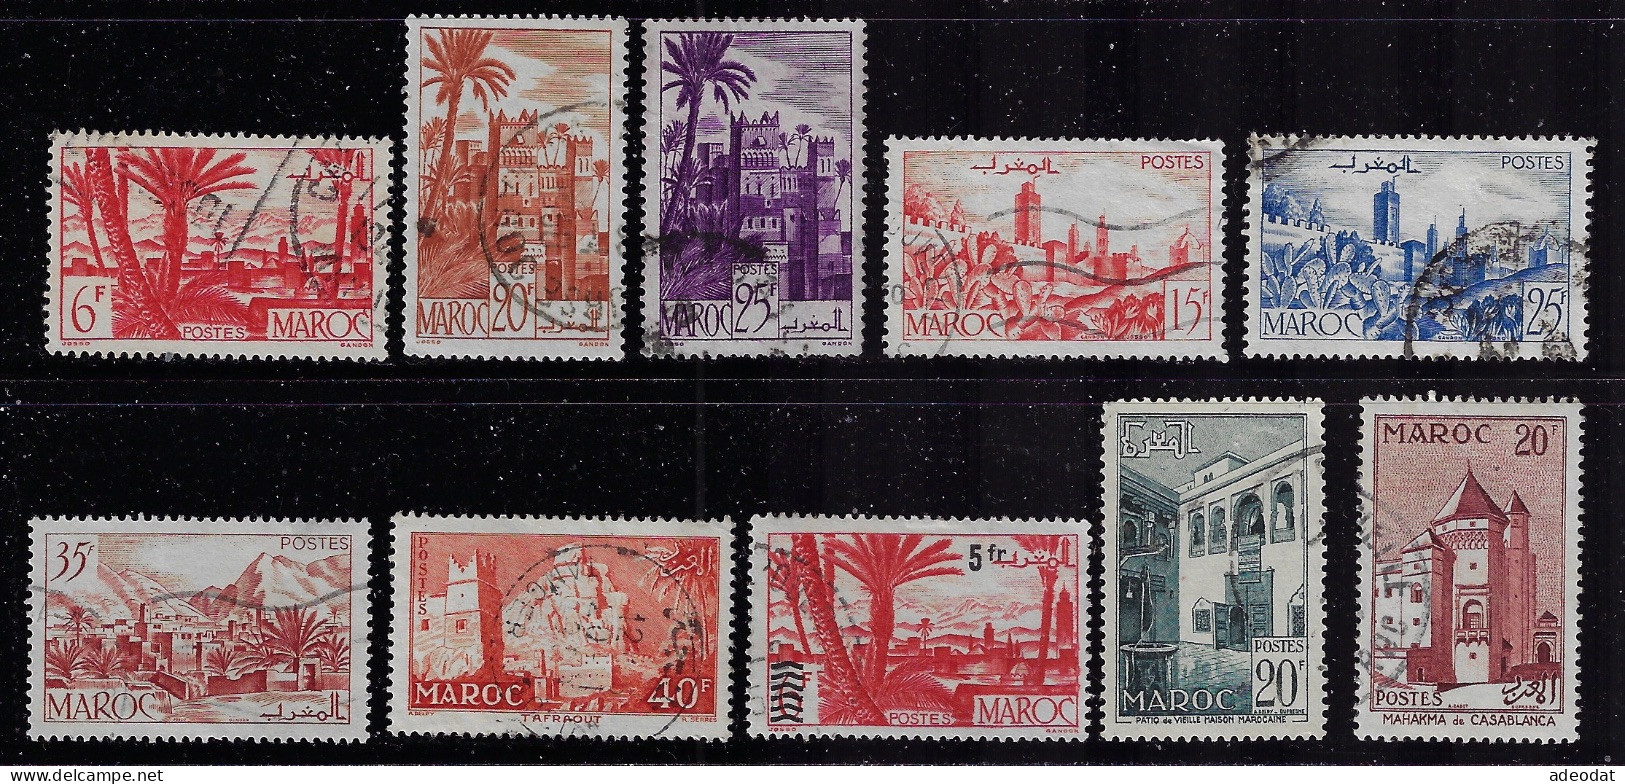 FRENCH MOROCCO 1947-1948 STAMPS CANCELLED.jpg - Usati